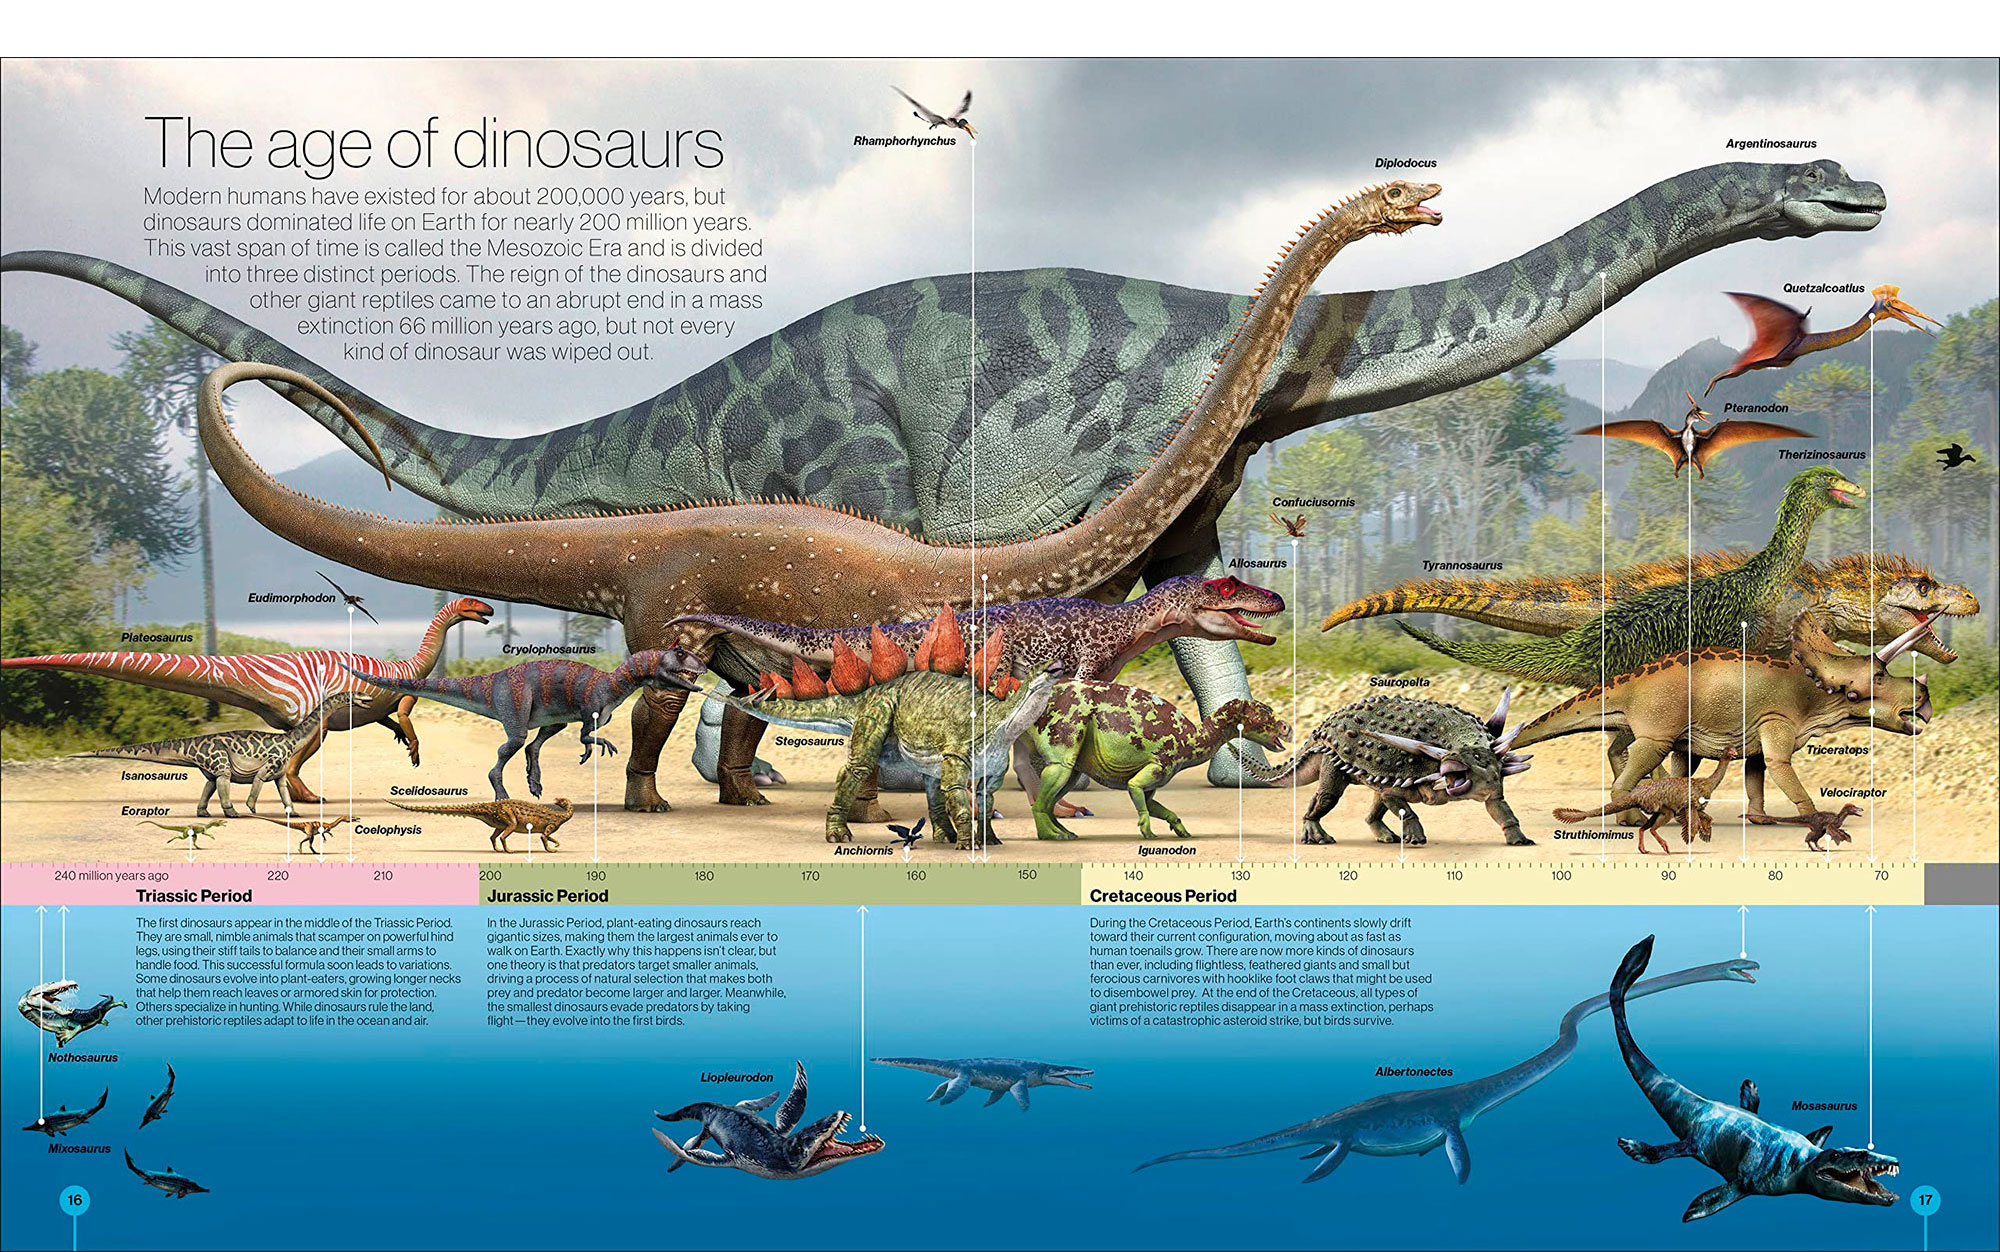 Pictorial timeline of dinosaurs